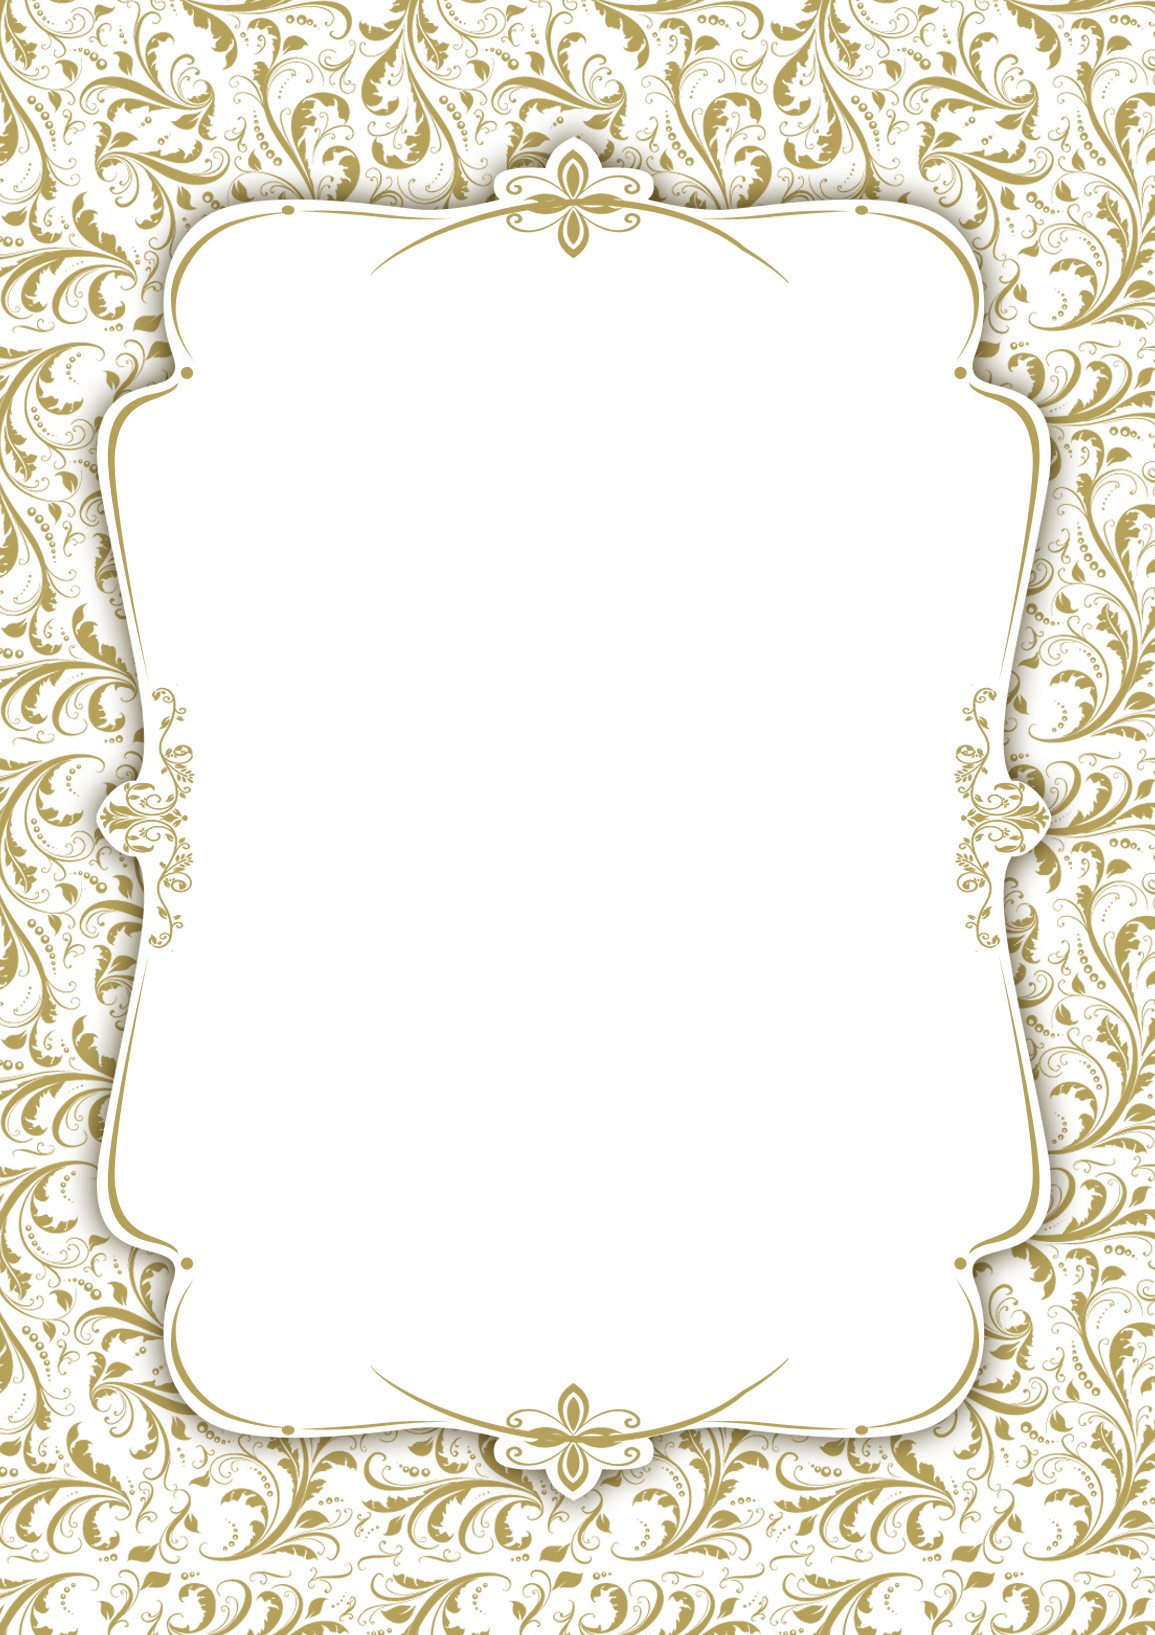 Tasteful Tapestry Frame – Free Wedding Invitation Template For Blank Templates For Invitations